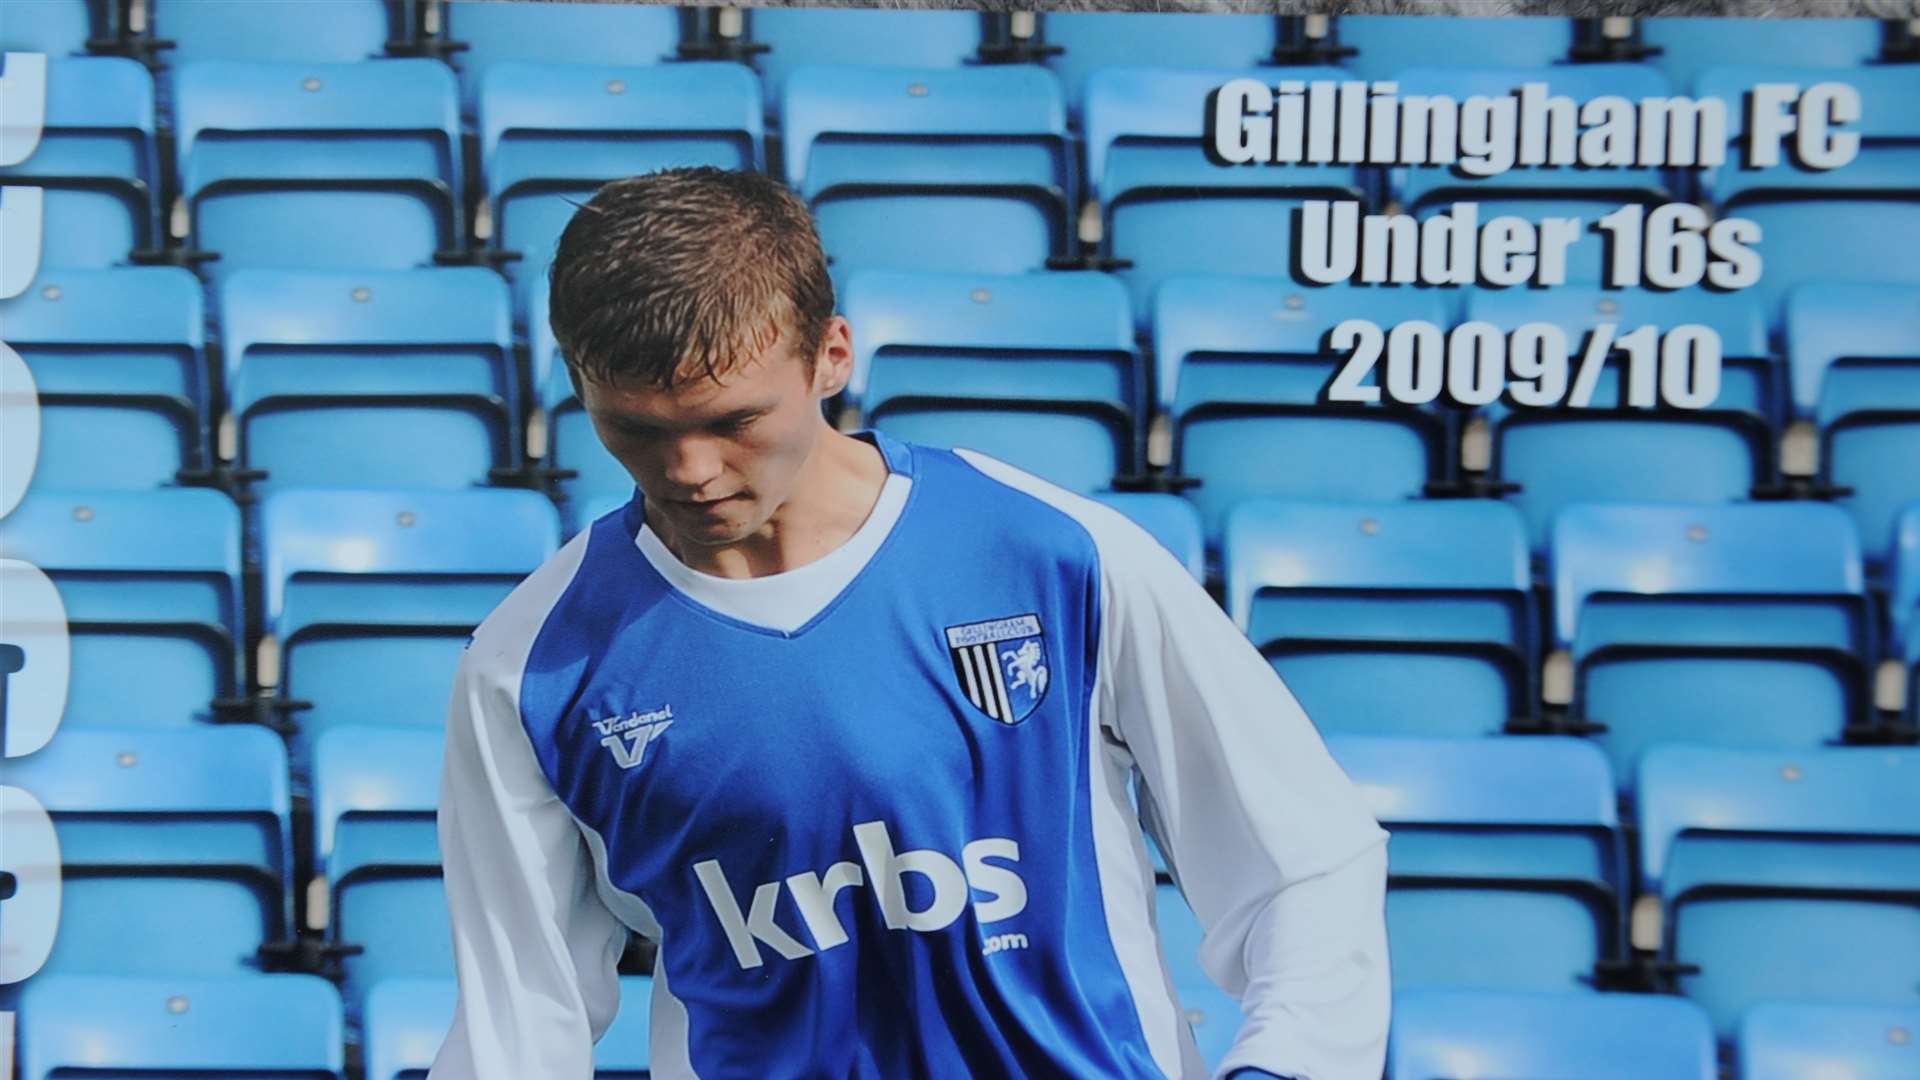 Sean playing for Gillingham FC under 16's